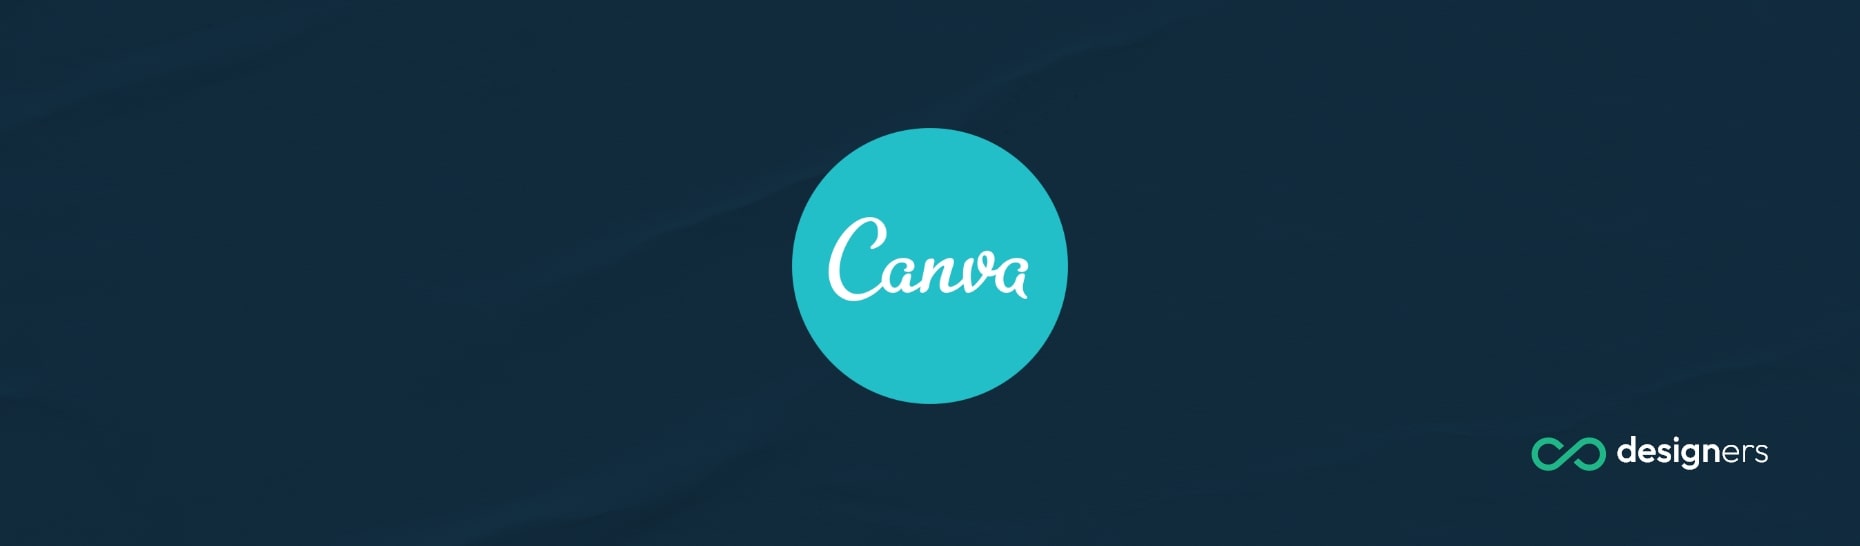 Is Canva Good for Reports?